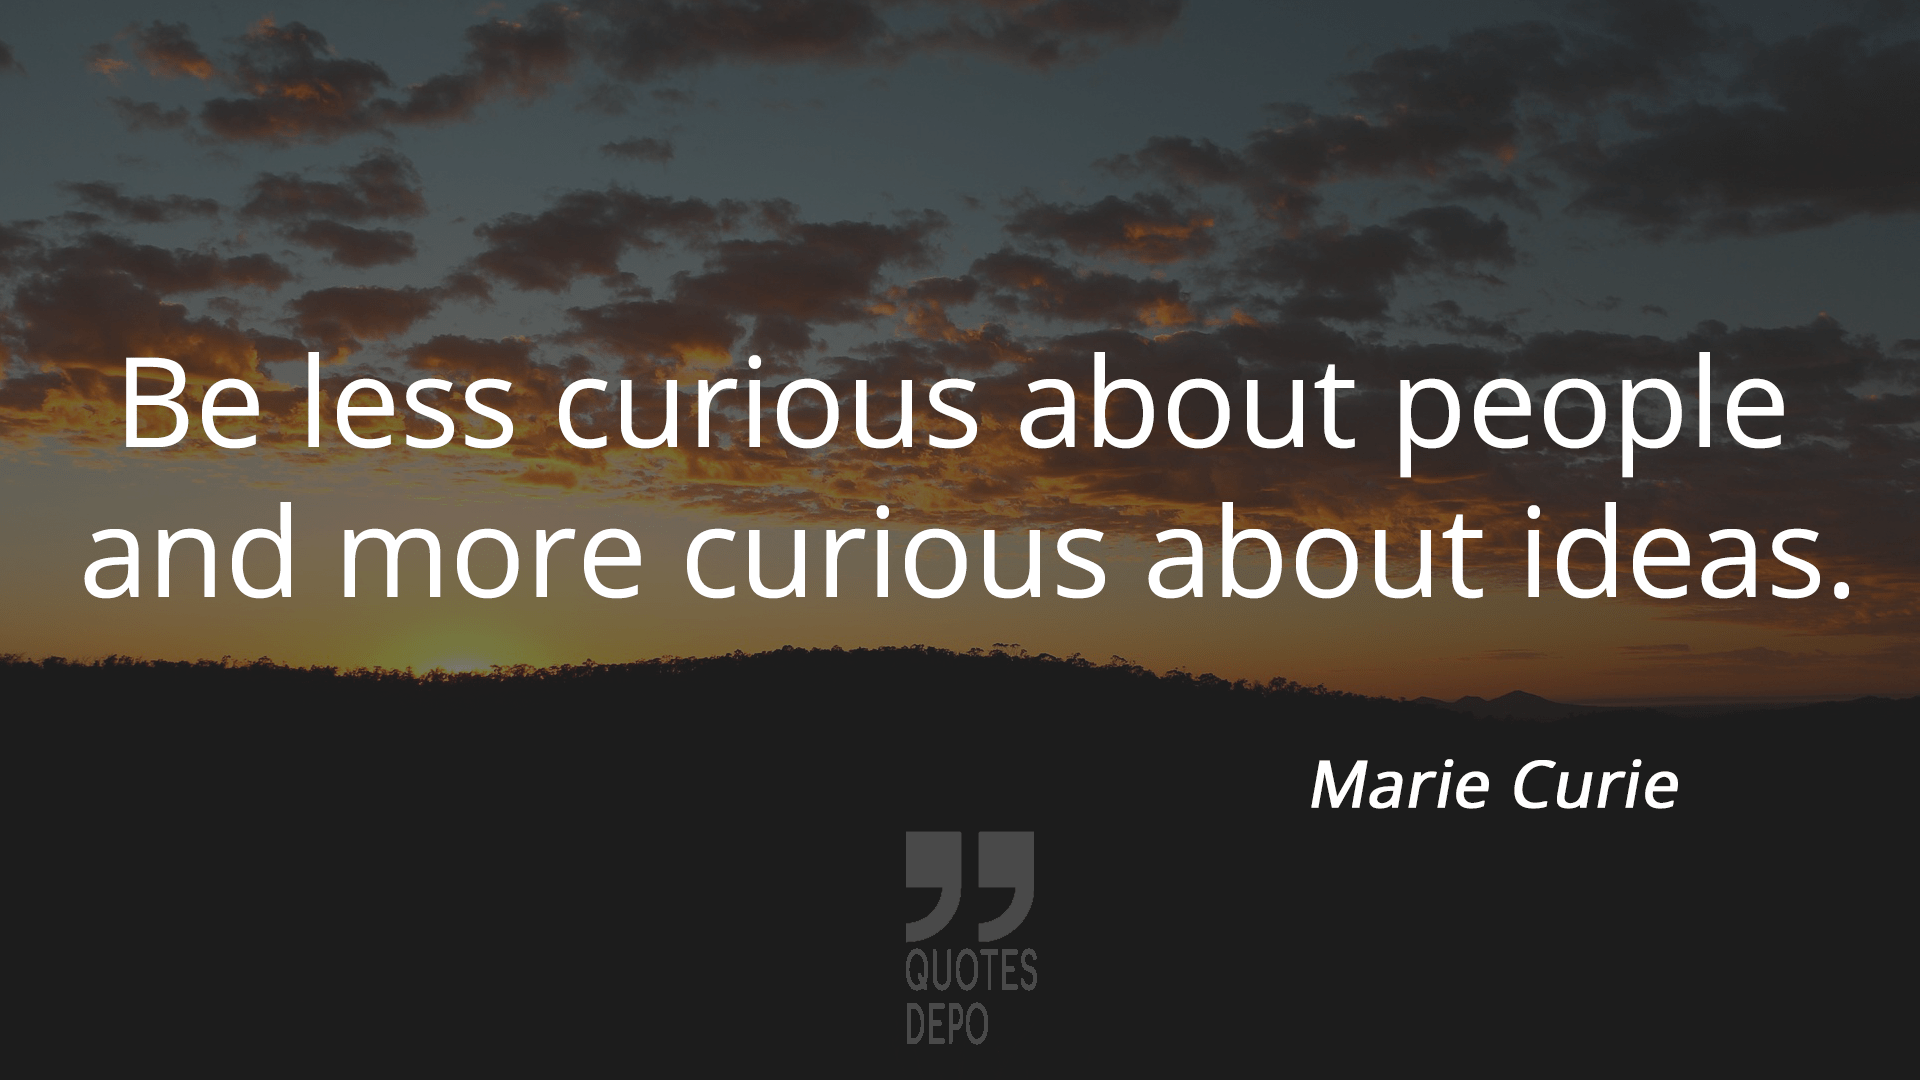 be less curious about people - marie curie quotes